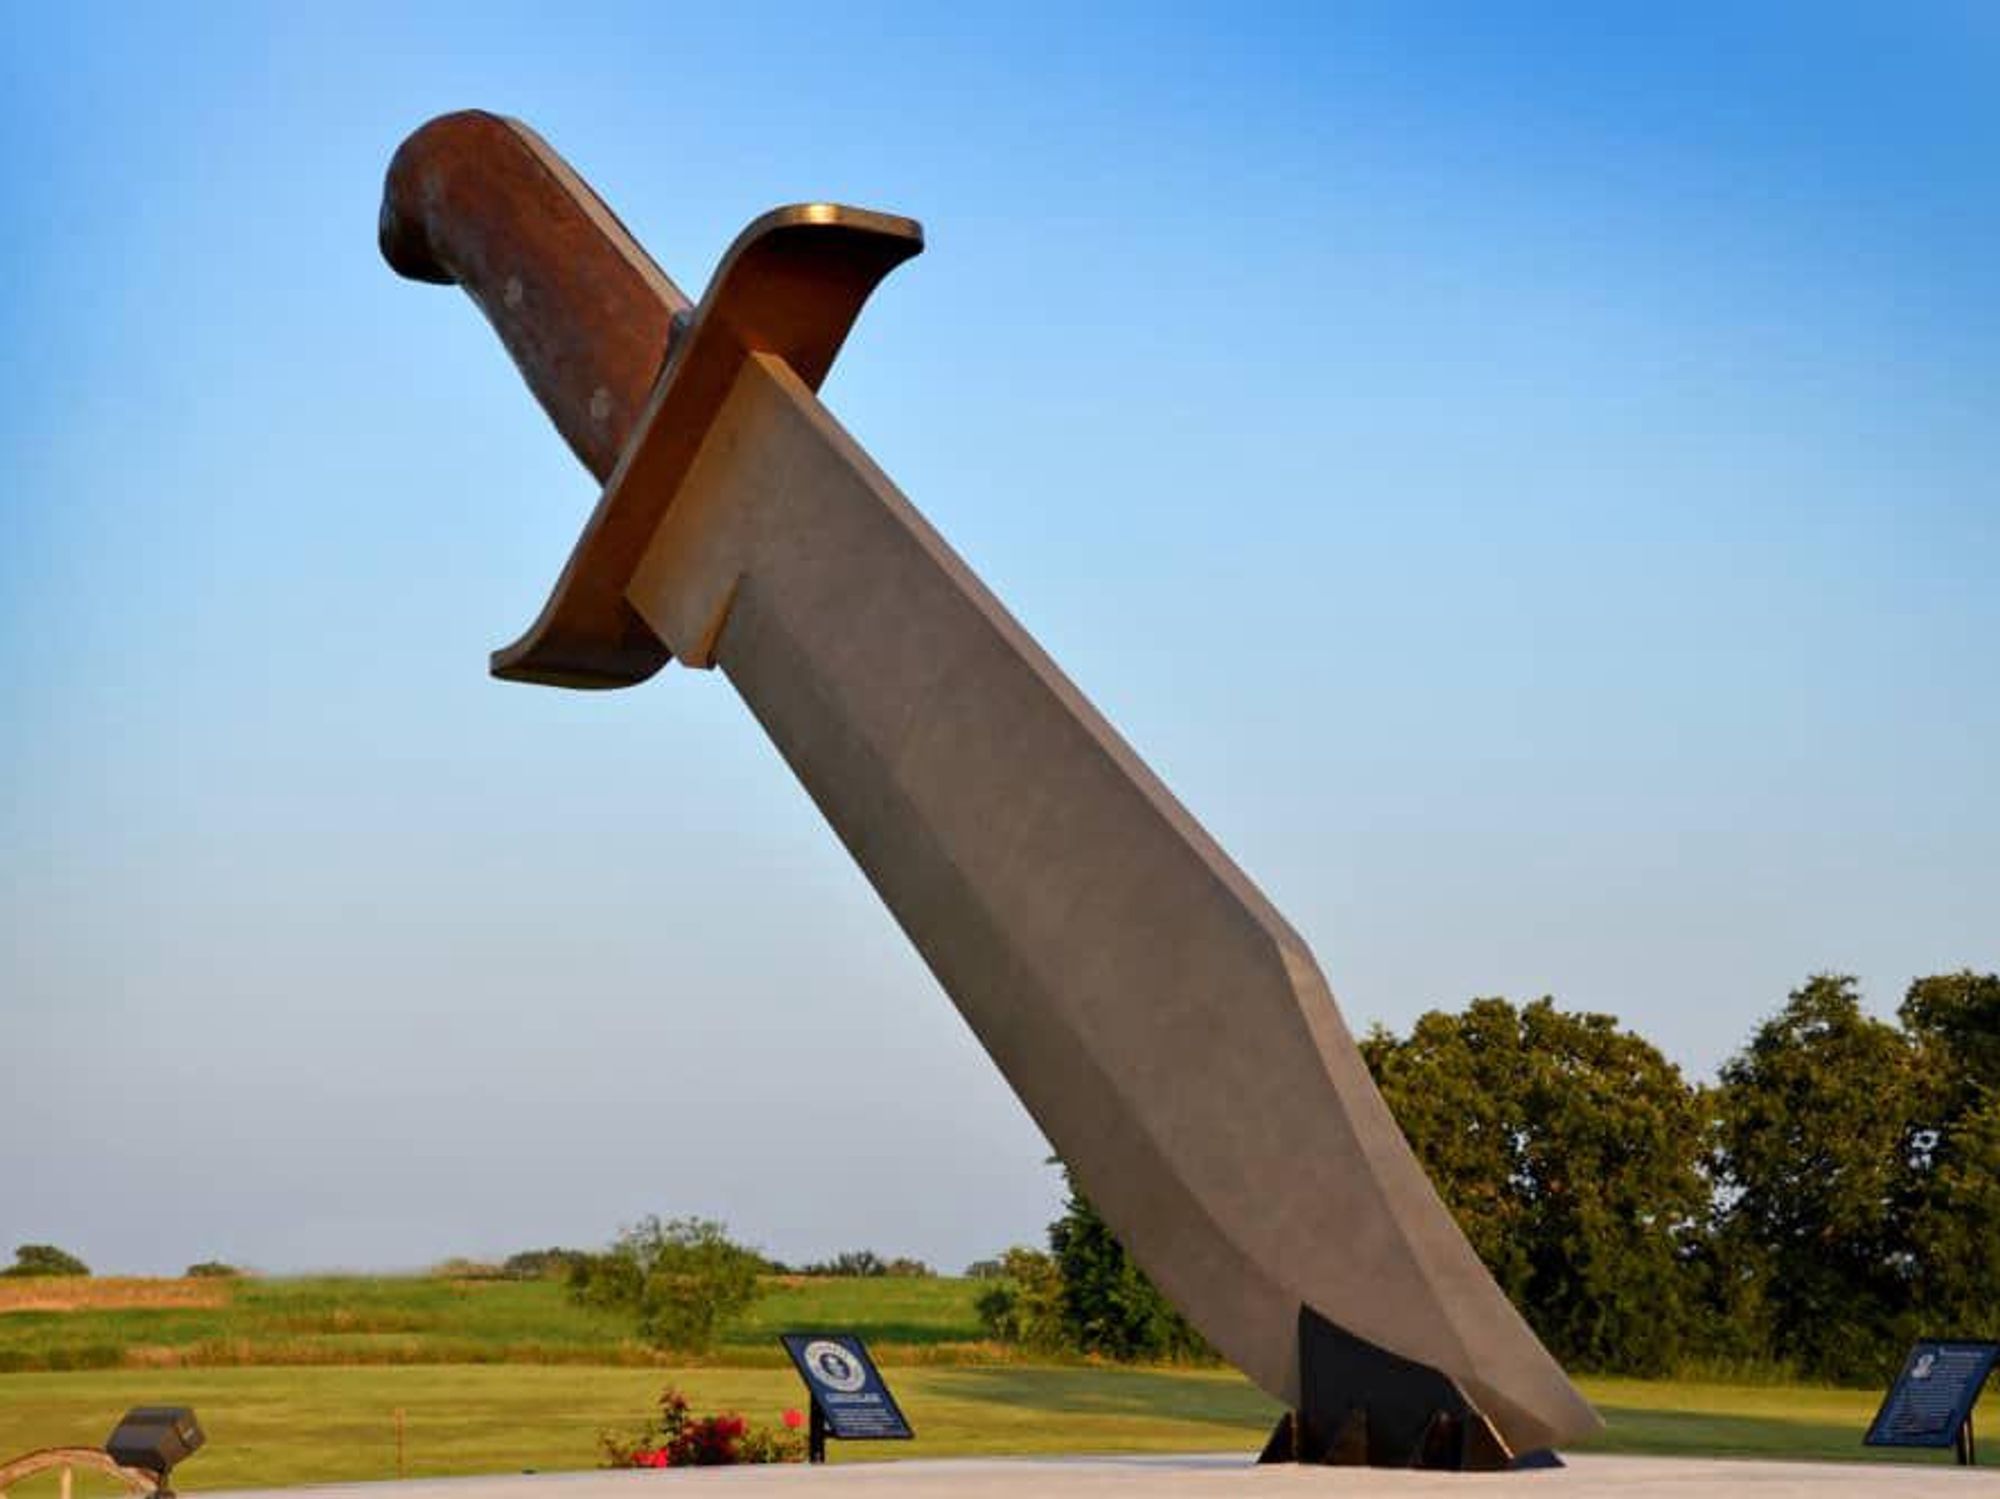 https://dallas.culturemap.com/media-library/bowie-is-home-to-the-worlds-largest-bowie-knife.jpg?id=29952817&width=2000&height=1500&quality=85&coordinates=57%2C0%2C57%2C0